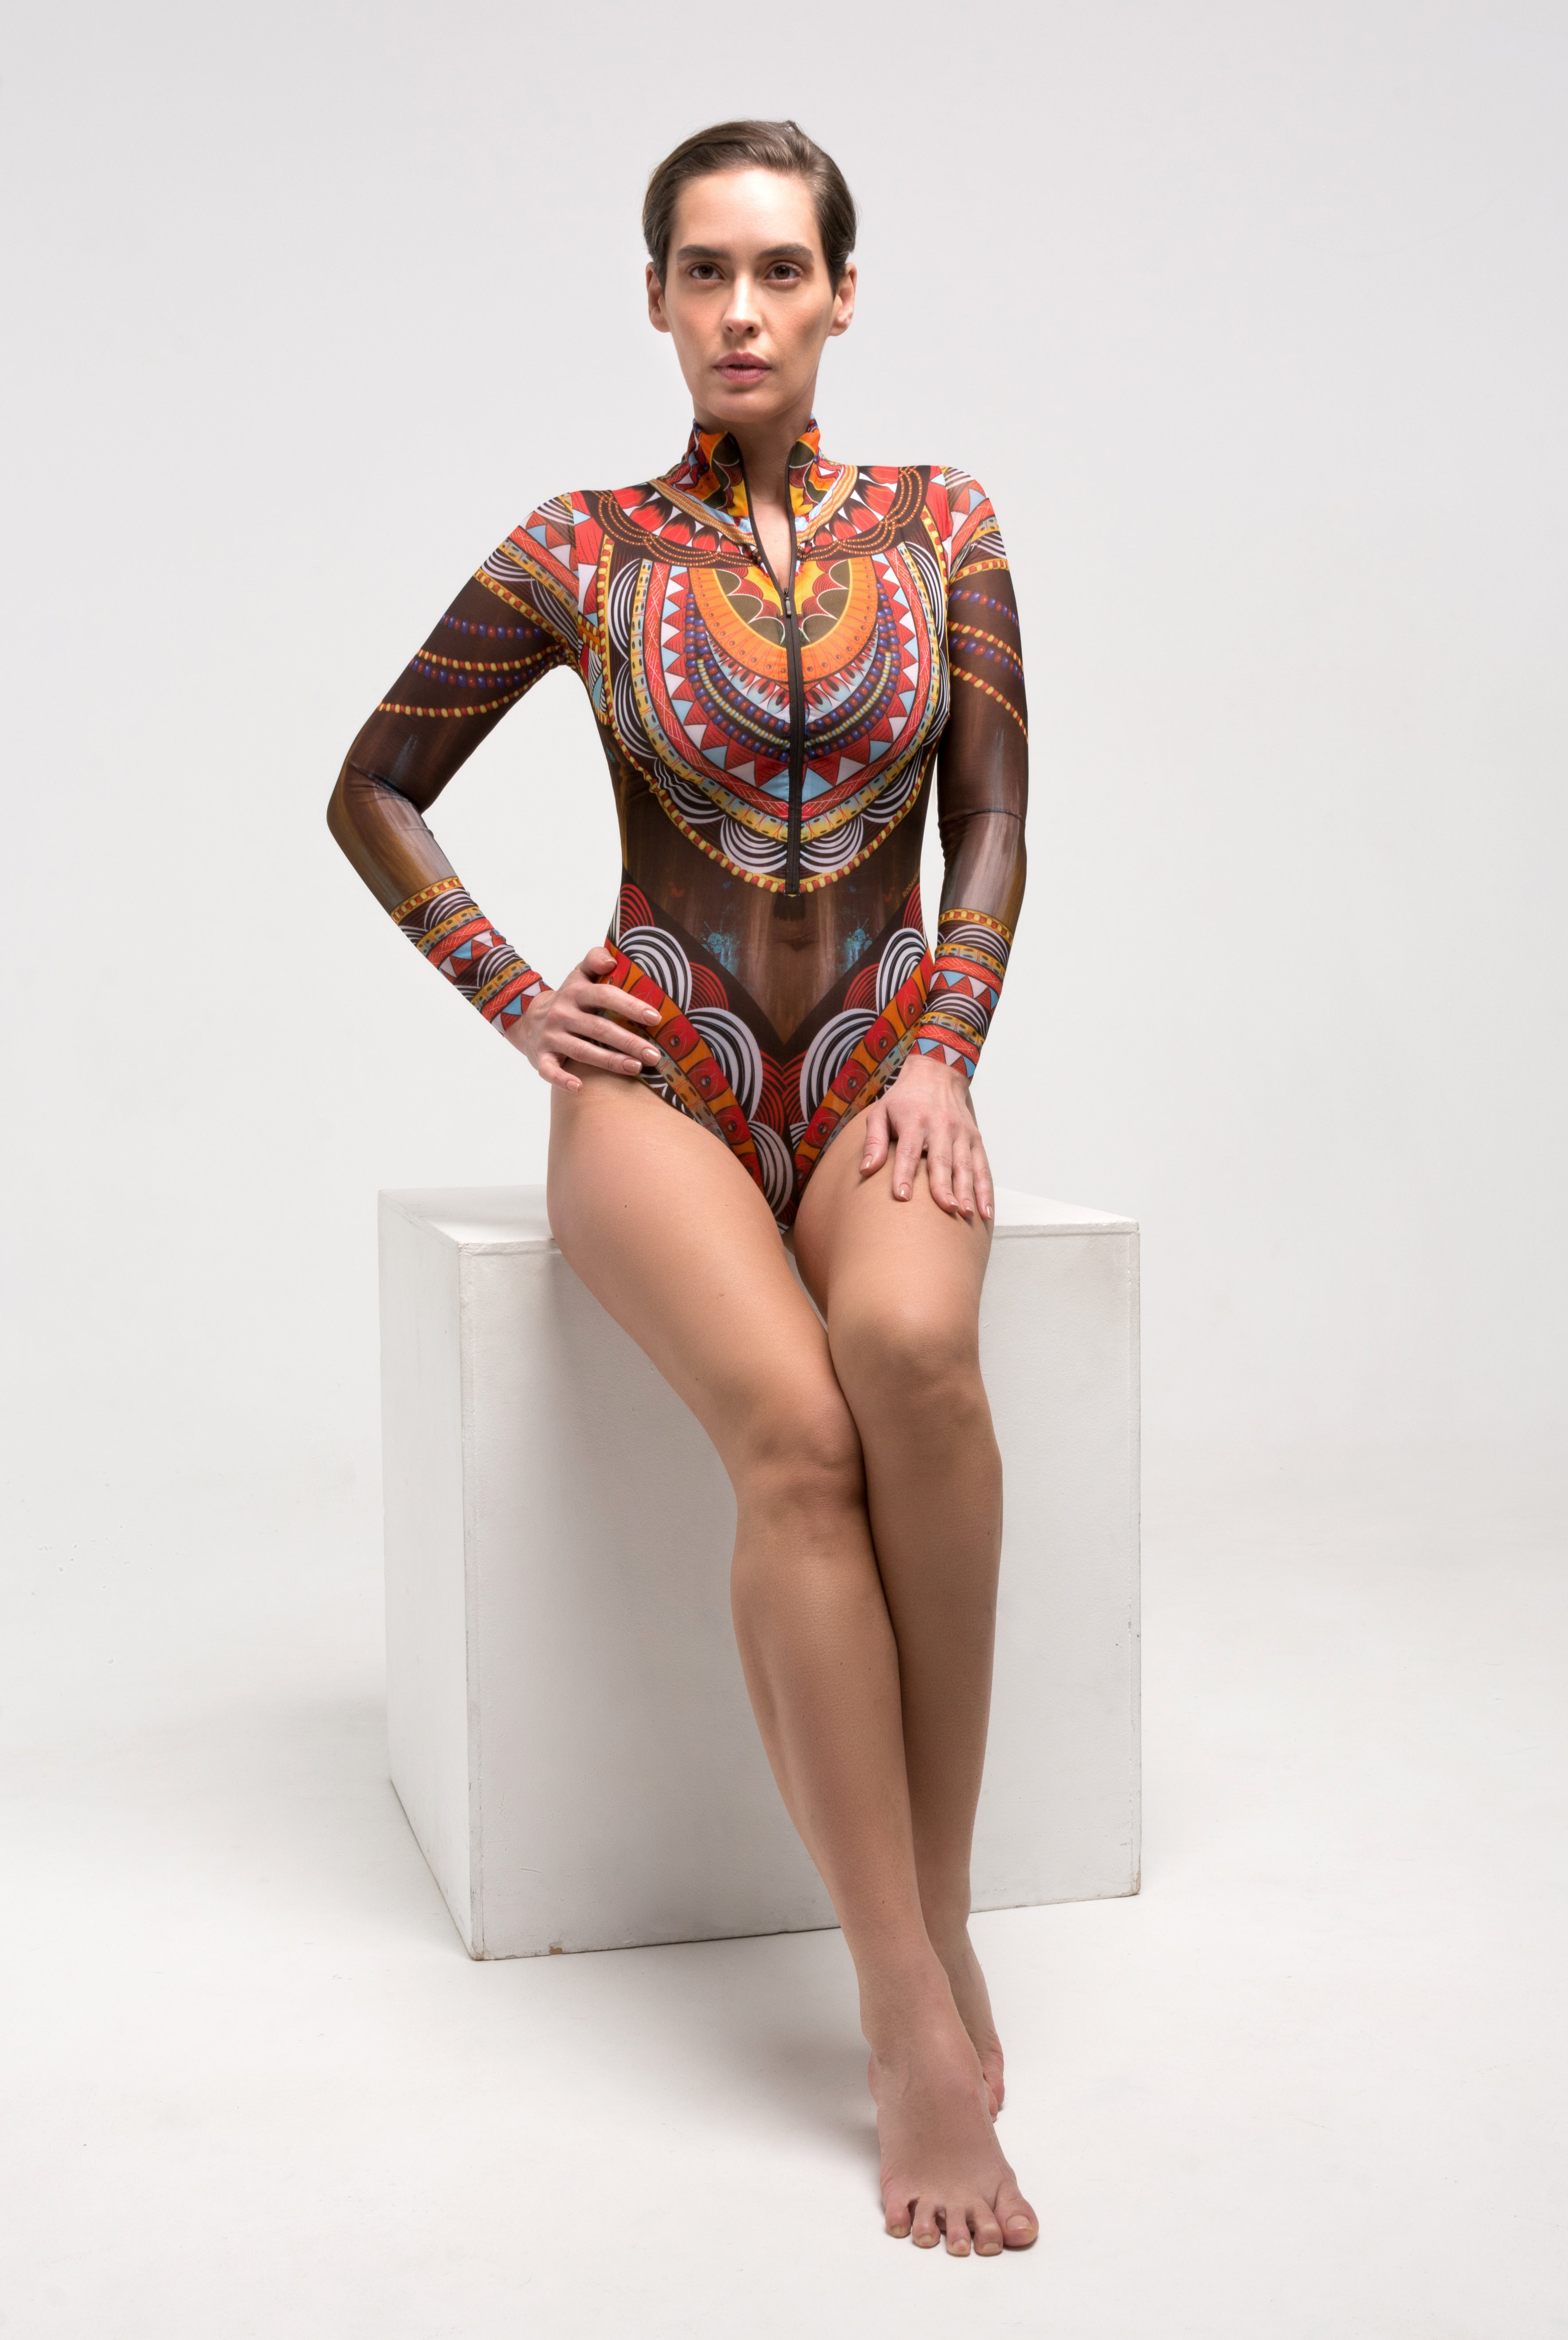 This file presents the epitome of innovation and sustainability in smart swimwear, showcasing our globally recognized brand. Featuring the Africa print, this one-piece with sleeves, zipper, and tan without tan lines technology exudes runway-worthy style